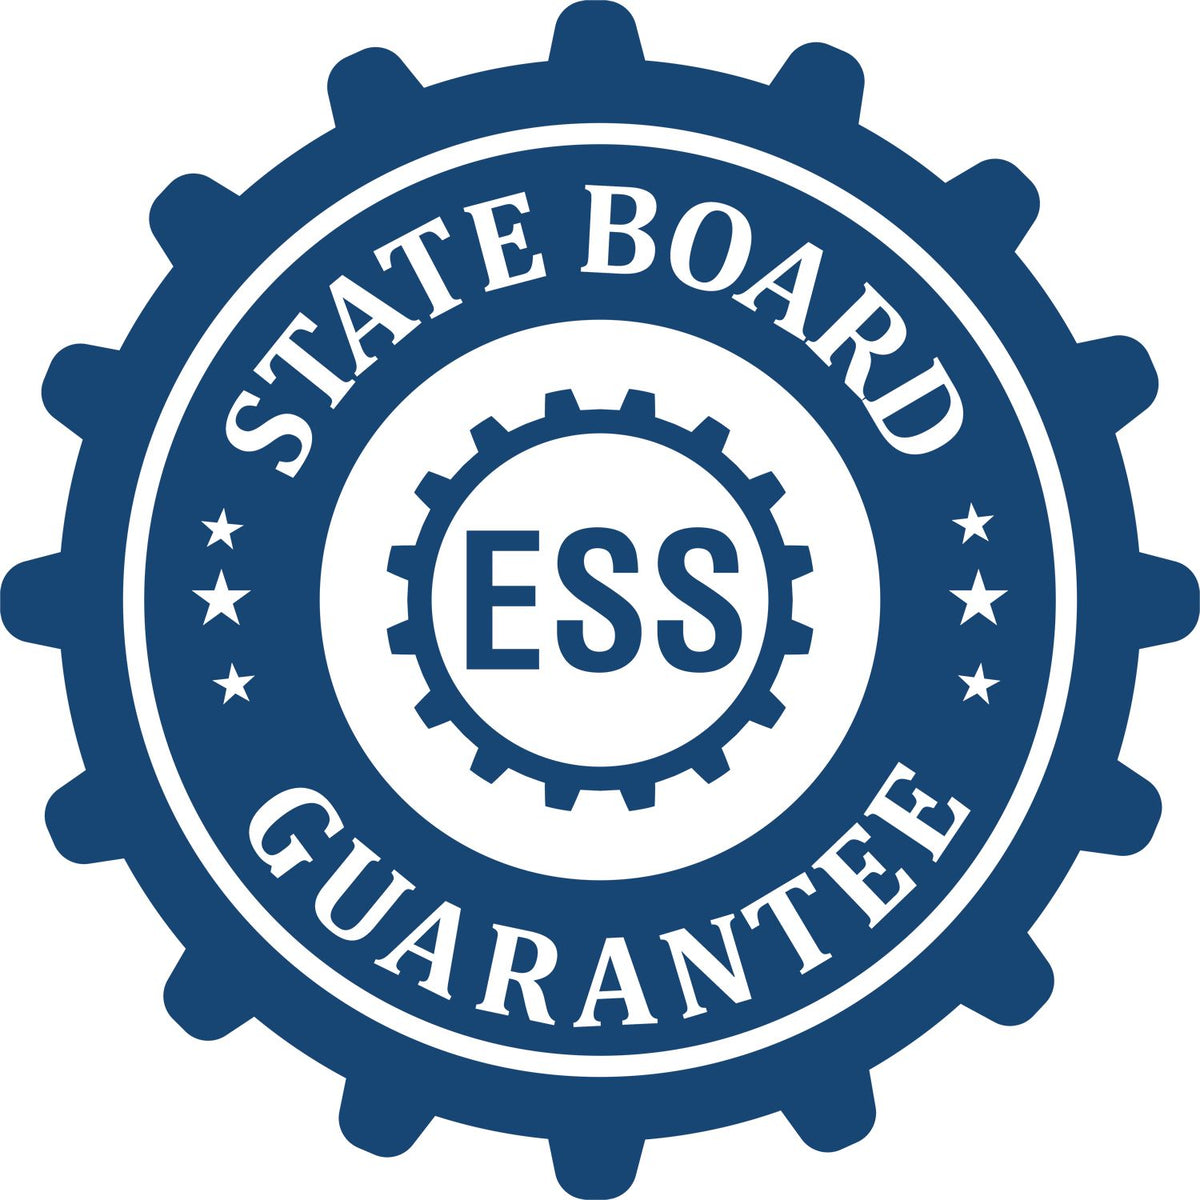 An emblem in a gear shape illustrating a state board guarantee for the North Dakota Desk Architect Embossing Seal product.